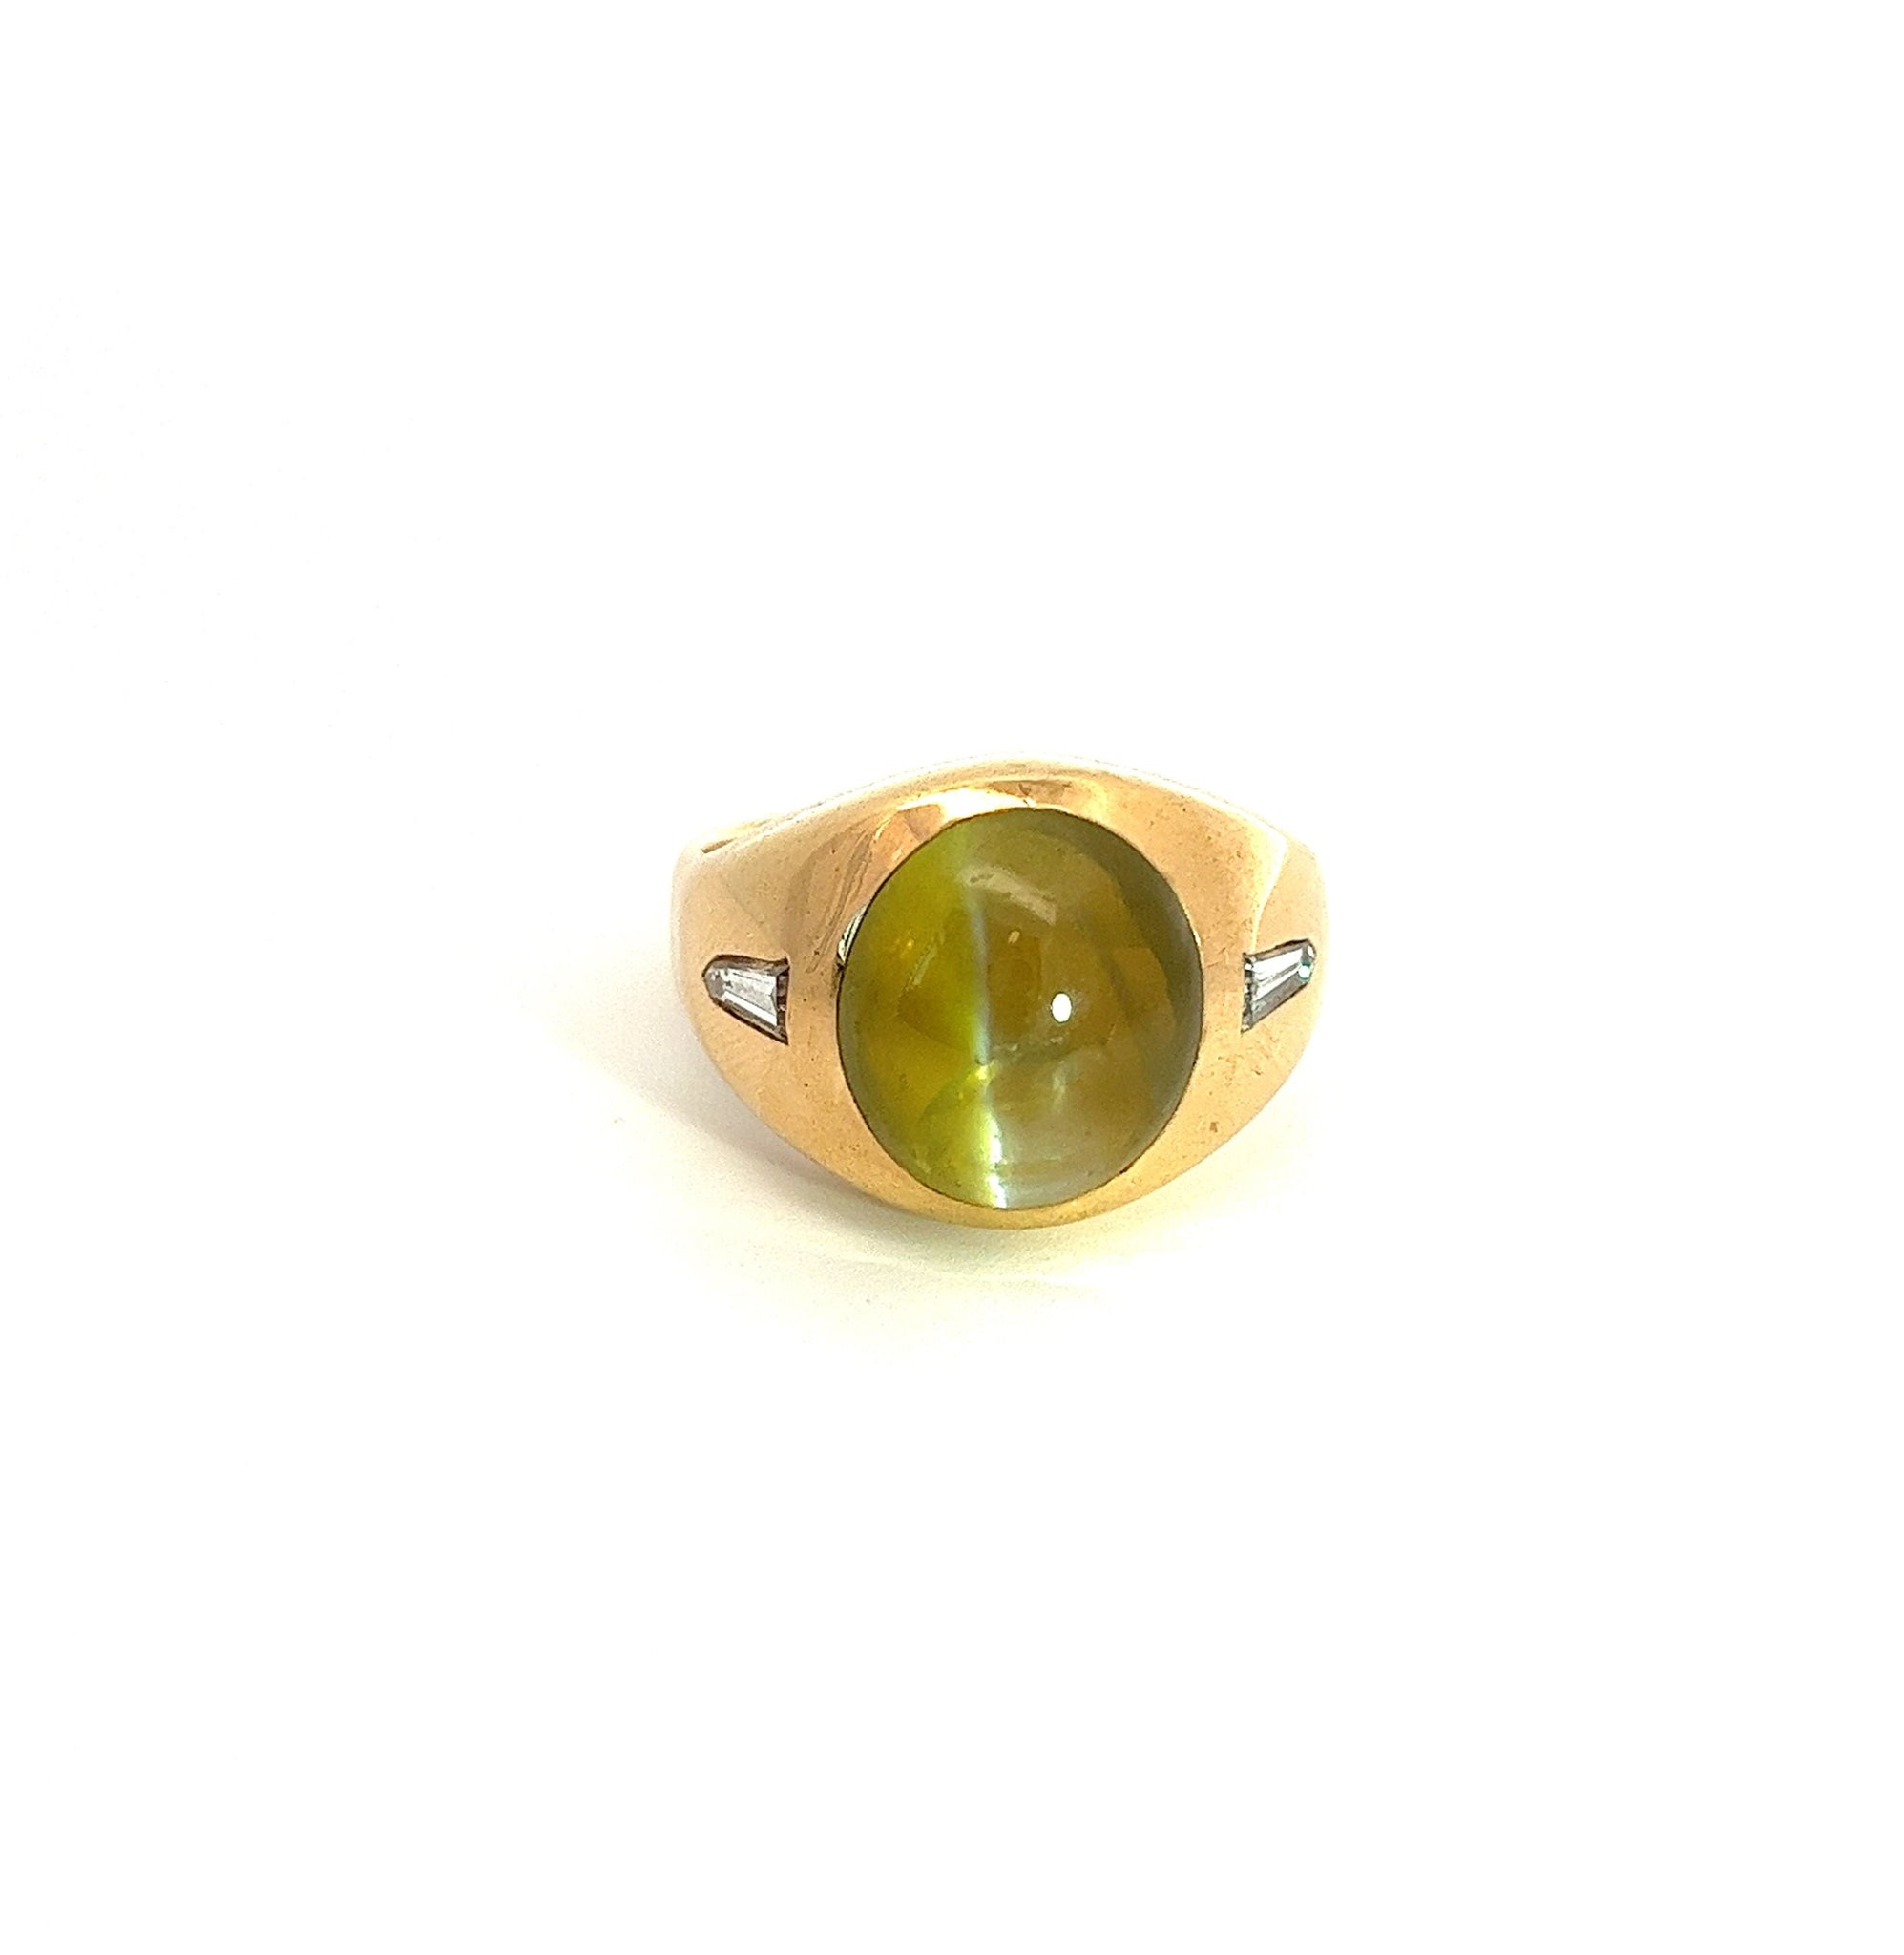 12 Carat Chrysoberyl Cats Eye Mens Ring With Baguette Diamond Sides in 18K Gold